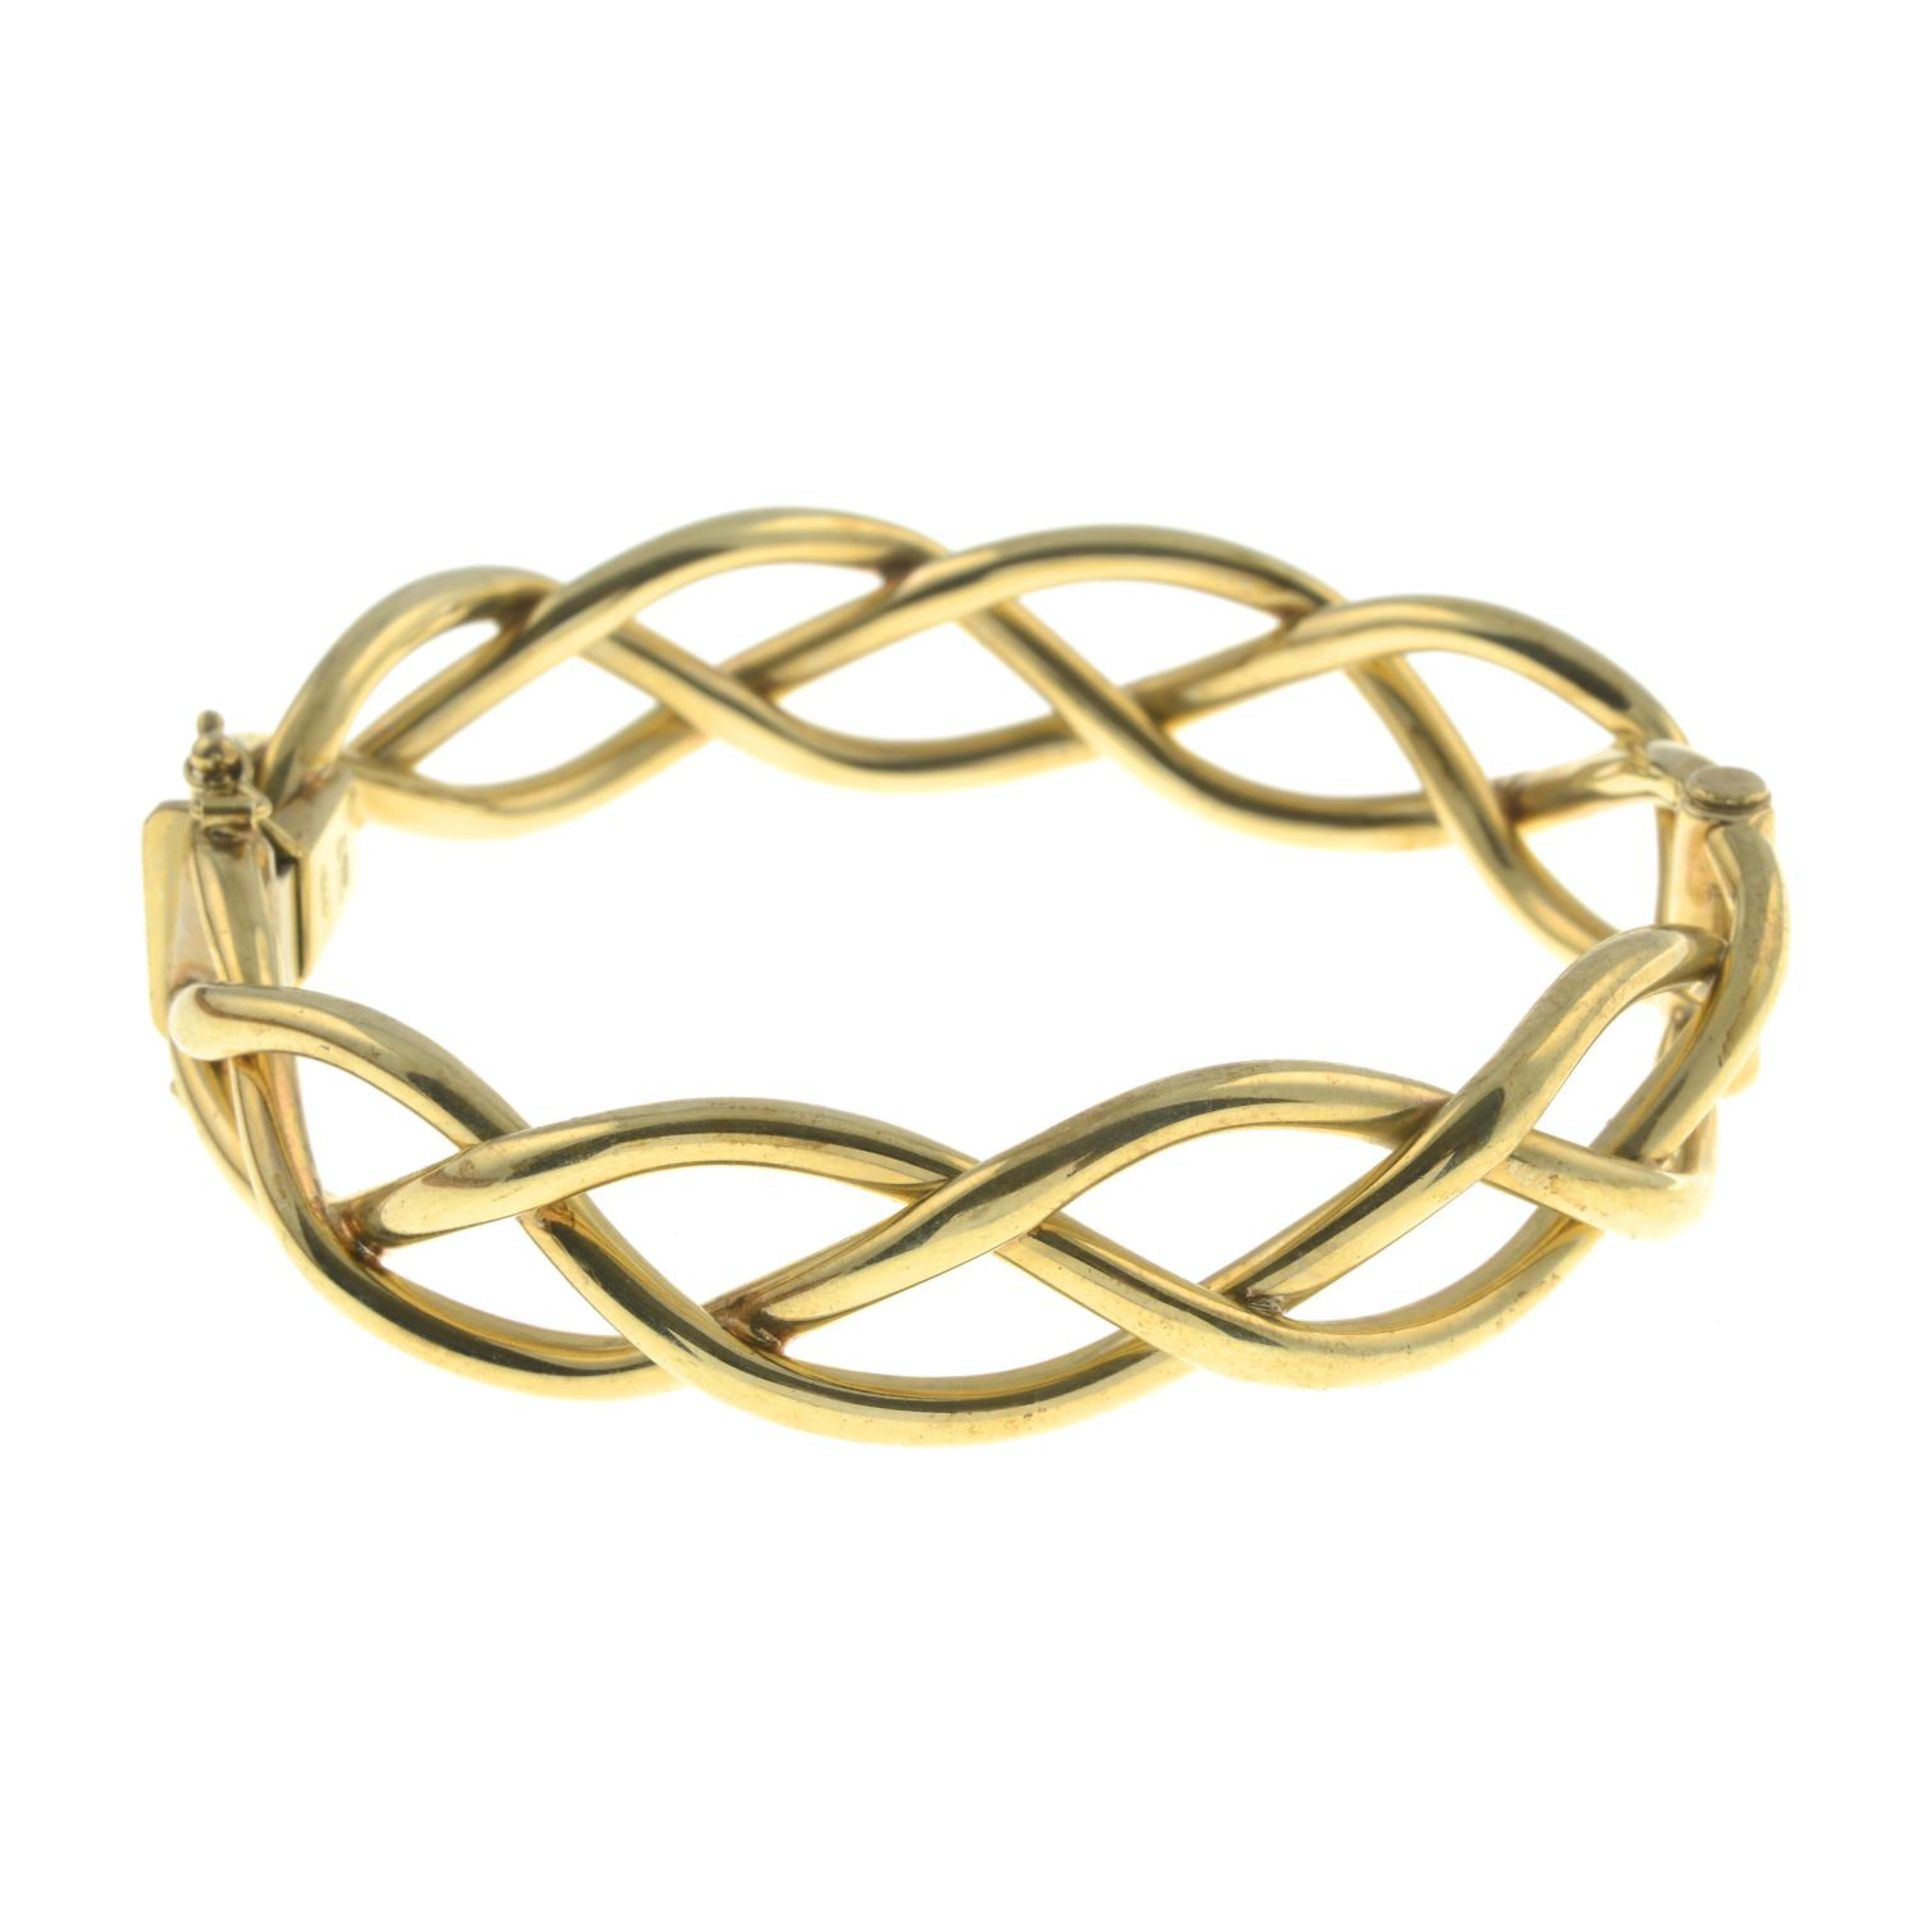 A 9ct gold woven bangle.Hallmarks for 9ct gold. - Image 2 of 2